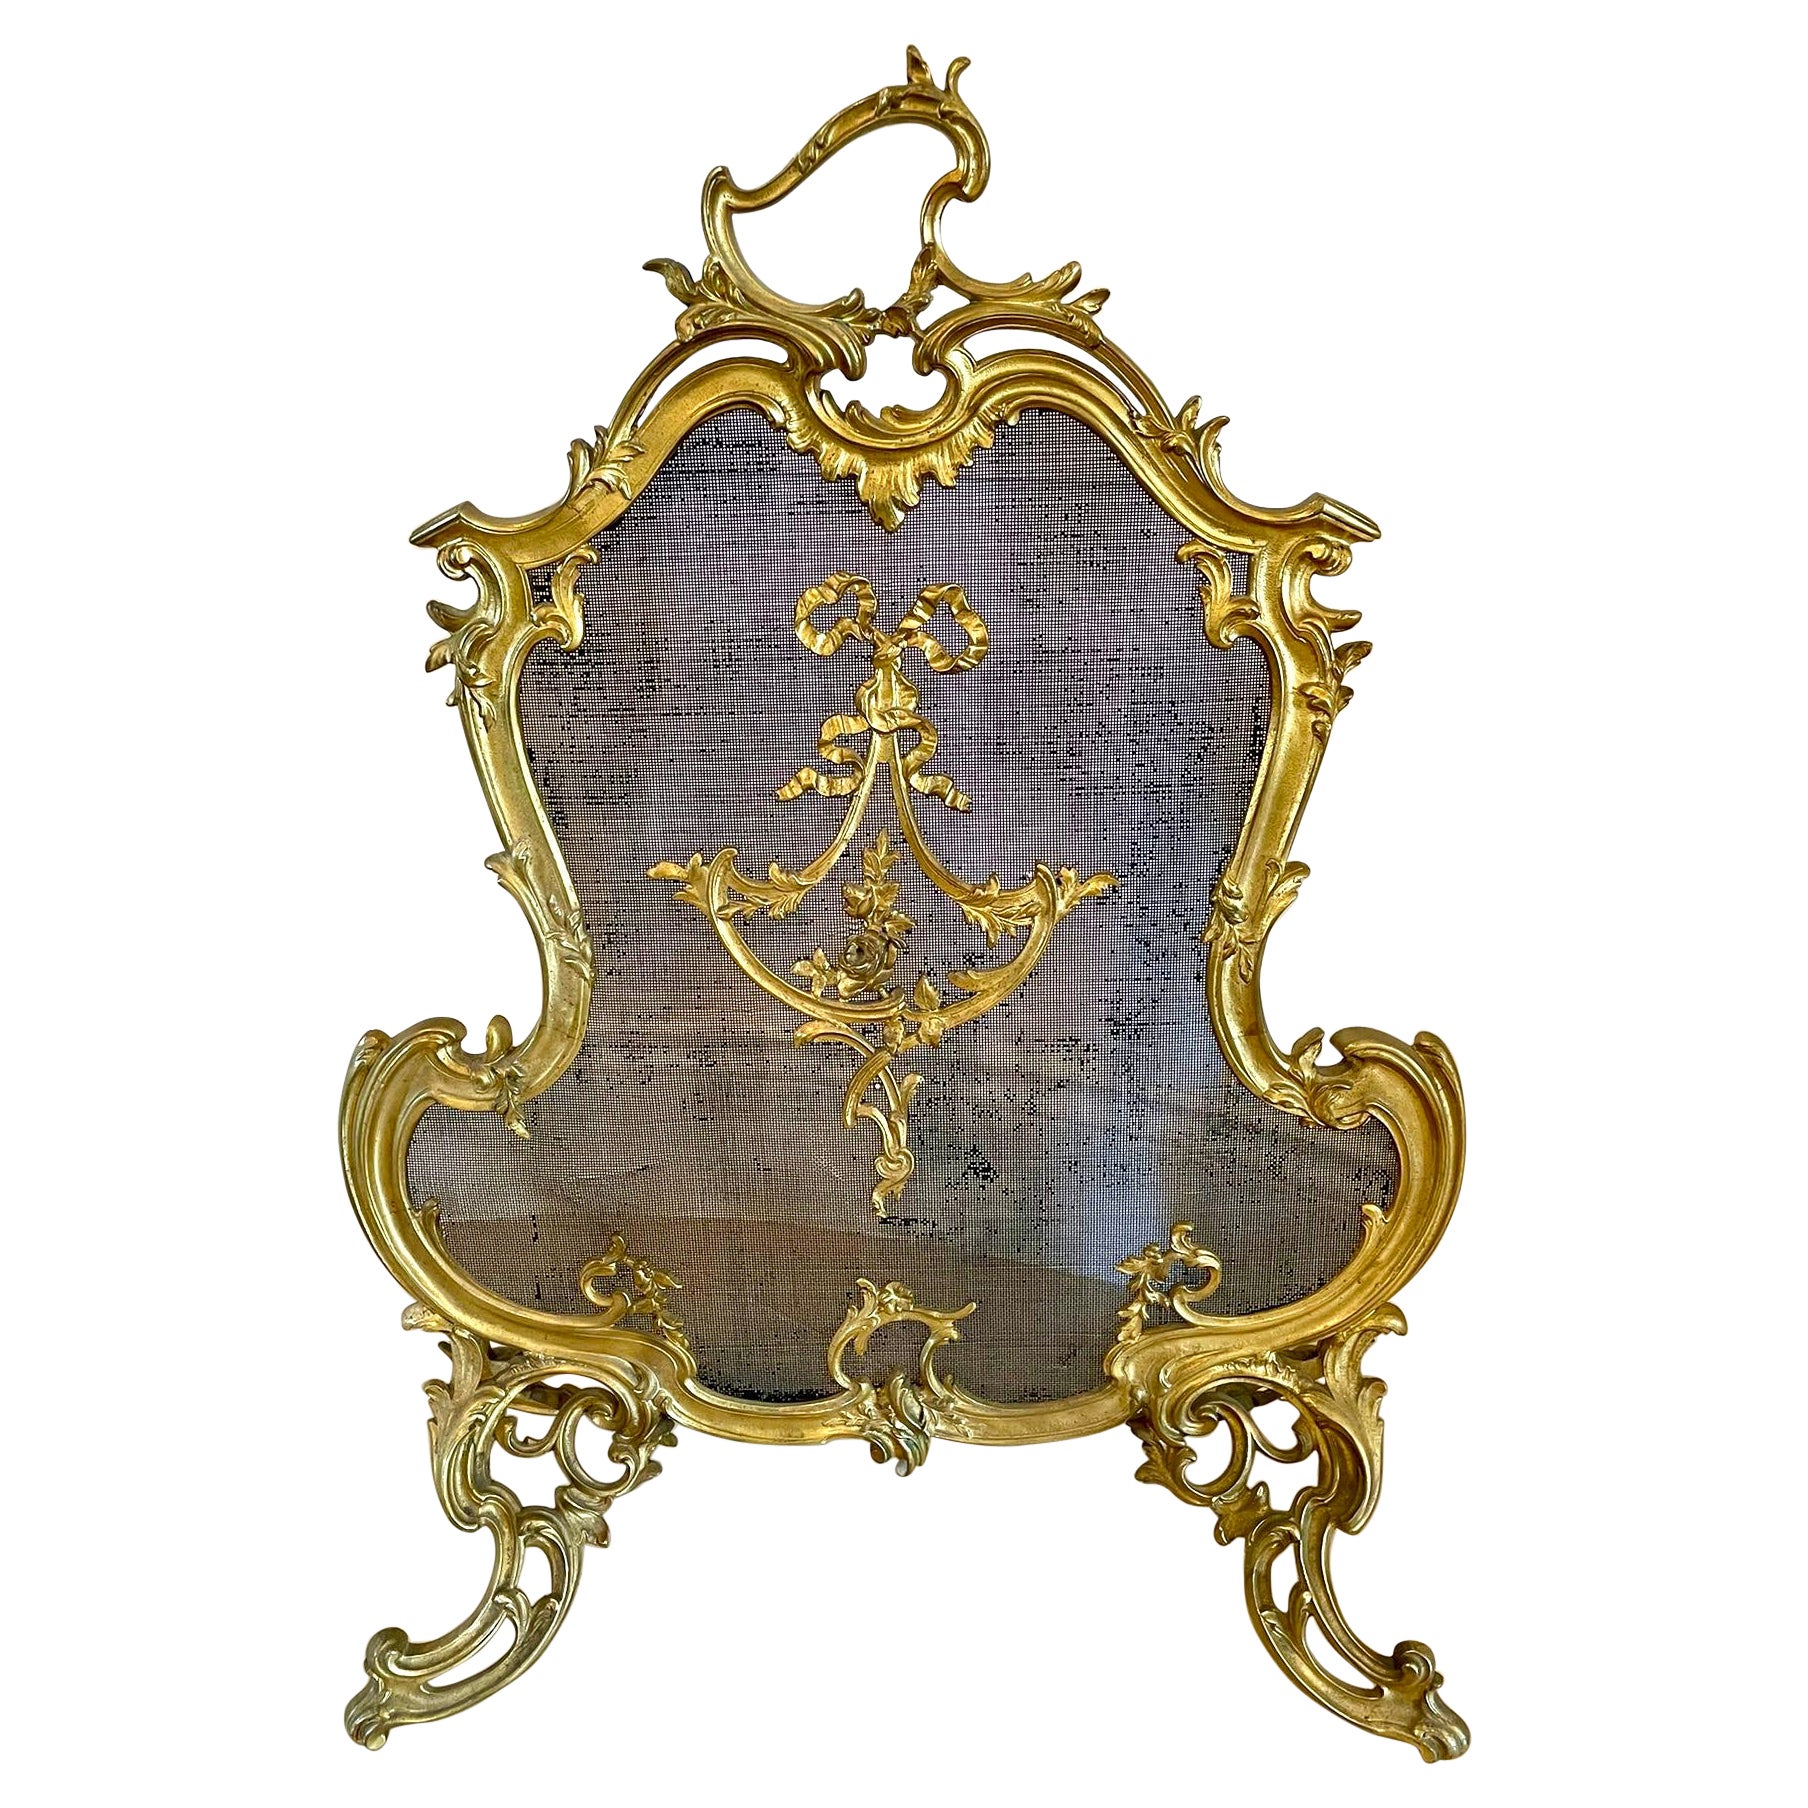 Outstanding Quality French 19th Century Ornate Gilt Ormolu Fire Screen